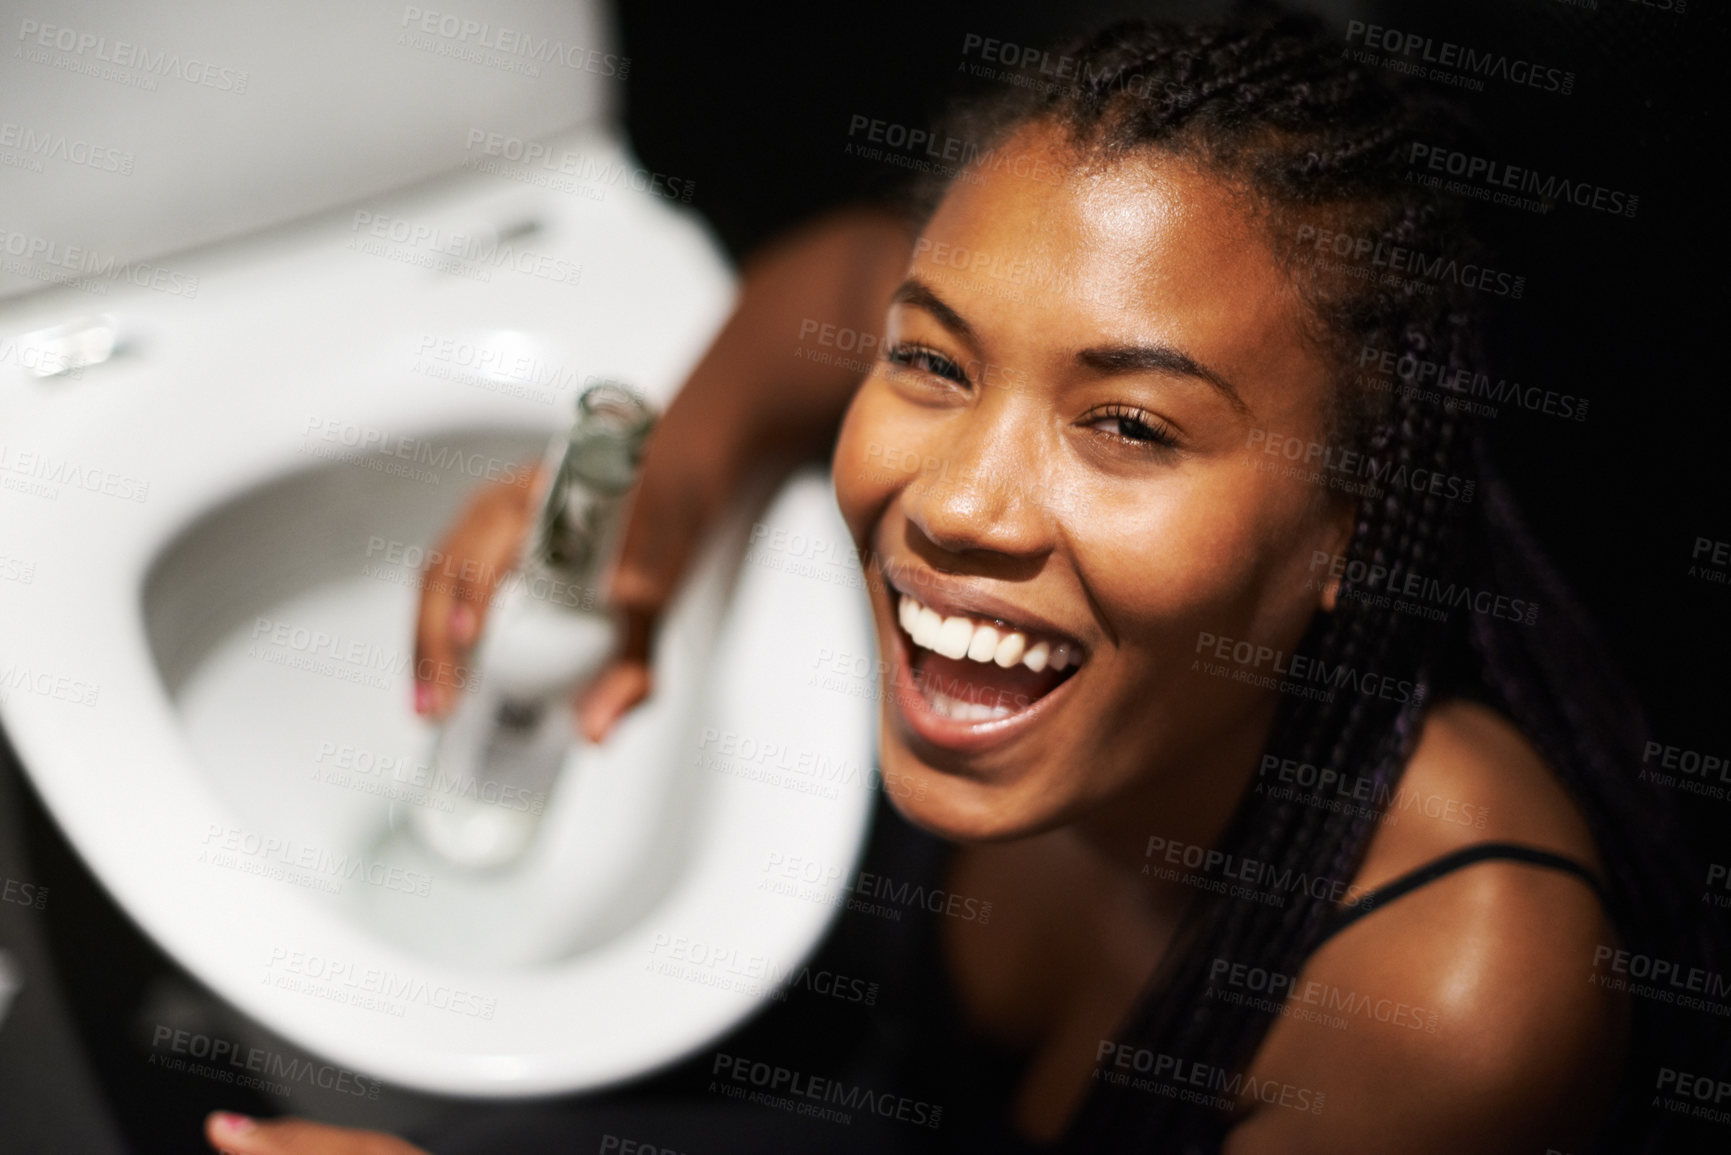 Buy stock photo Black woman, face and drinking alcohol by toilet in party event, birthday celebration or nightclub social gathering. Portrait, smile or happy drunk person with beer bottle in music festival bathroom